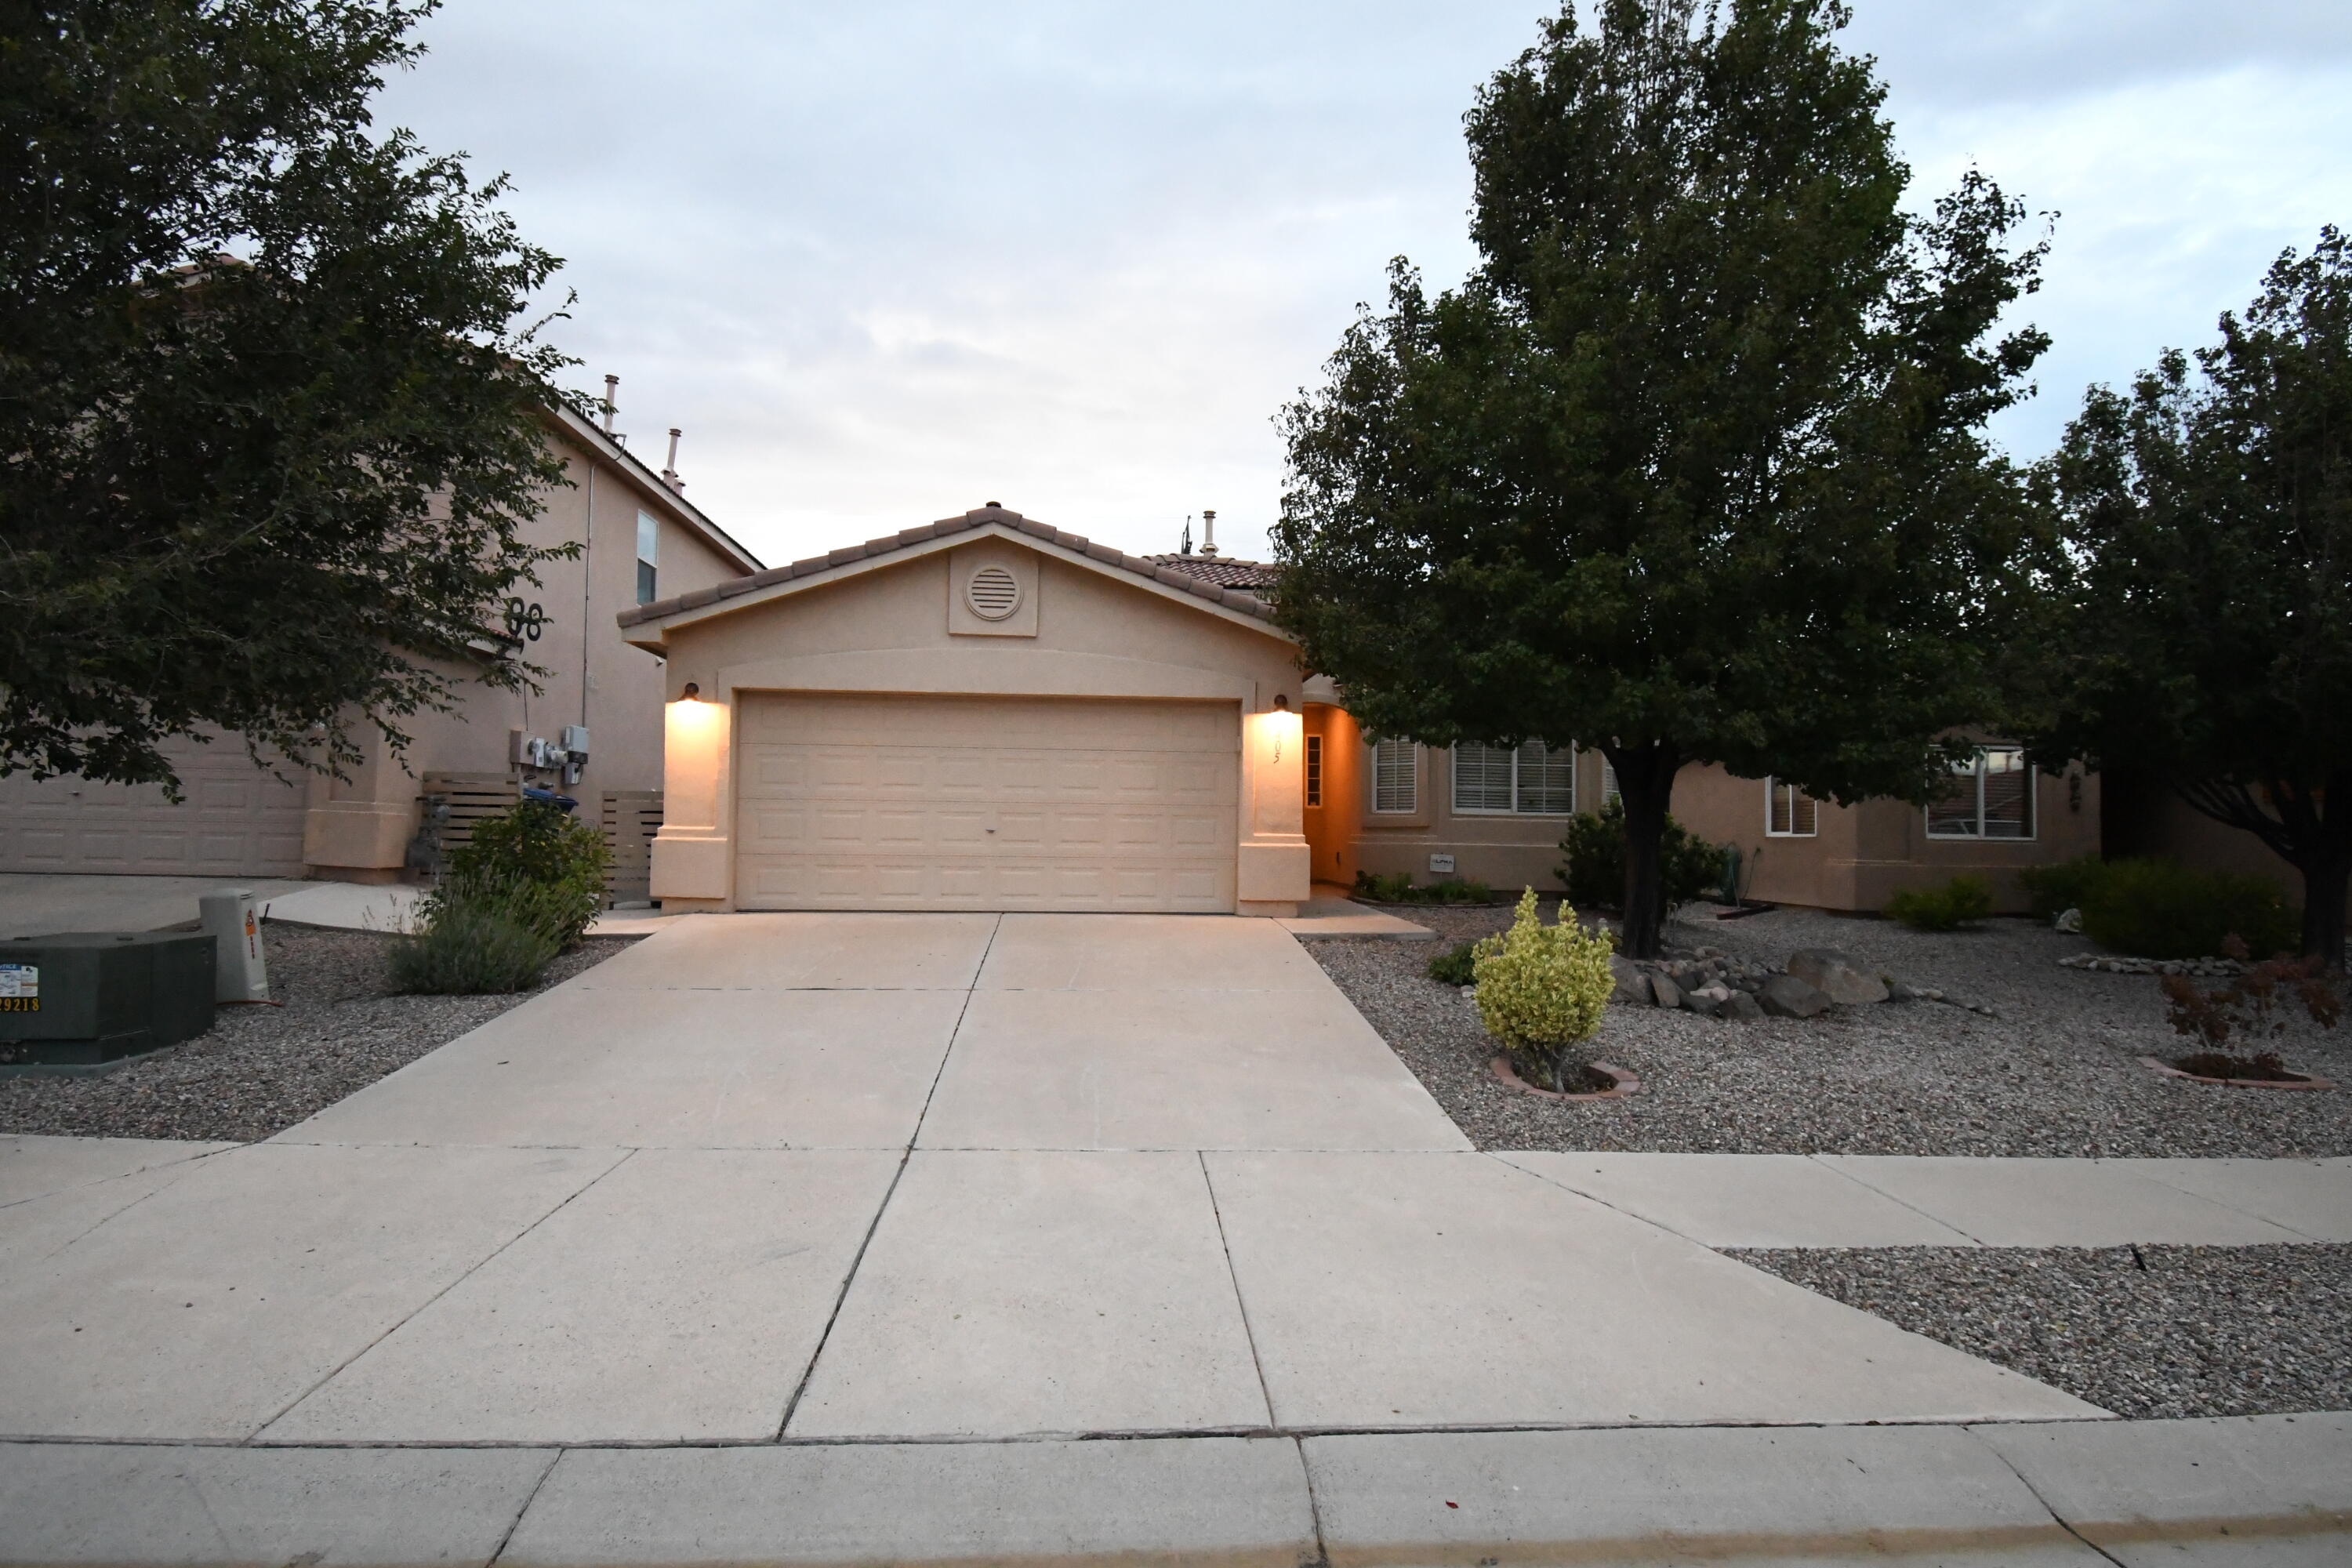 Come see this upgraded , one owner delight!  The open floor plan features vaulted ceilings, granite counter tops, refrigerated A/C, the seller updated the kitchen in 2018, new tile flooring, gas fireplace, covered patio, view deck and low-maintenance landscaping in front and back, PRIDE OF OWNERSHIP throughout!